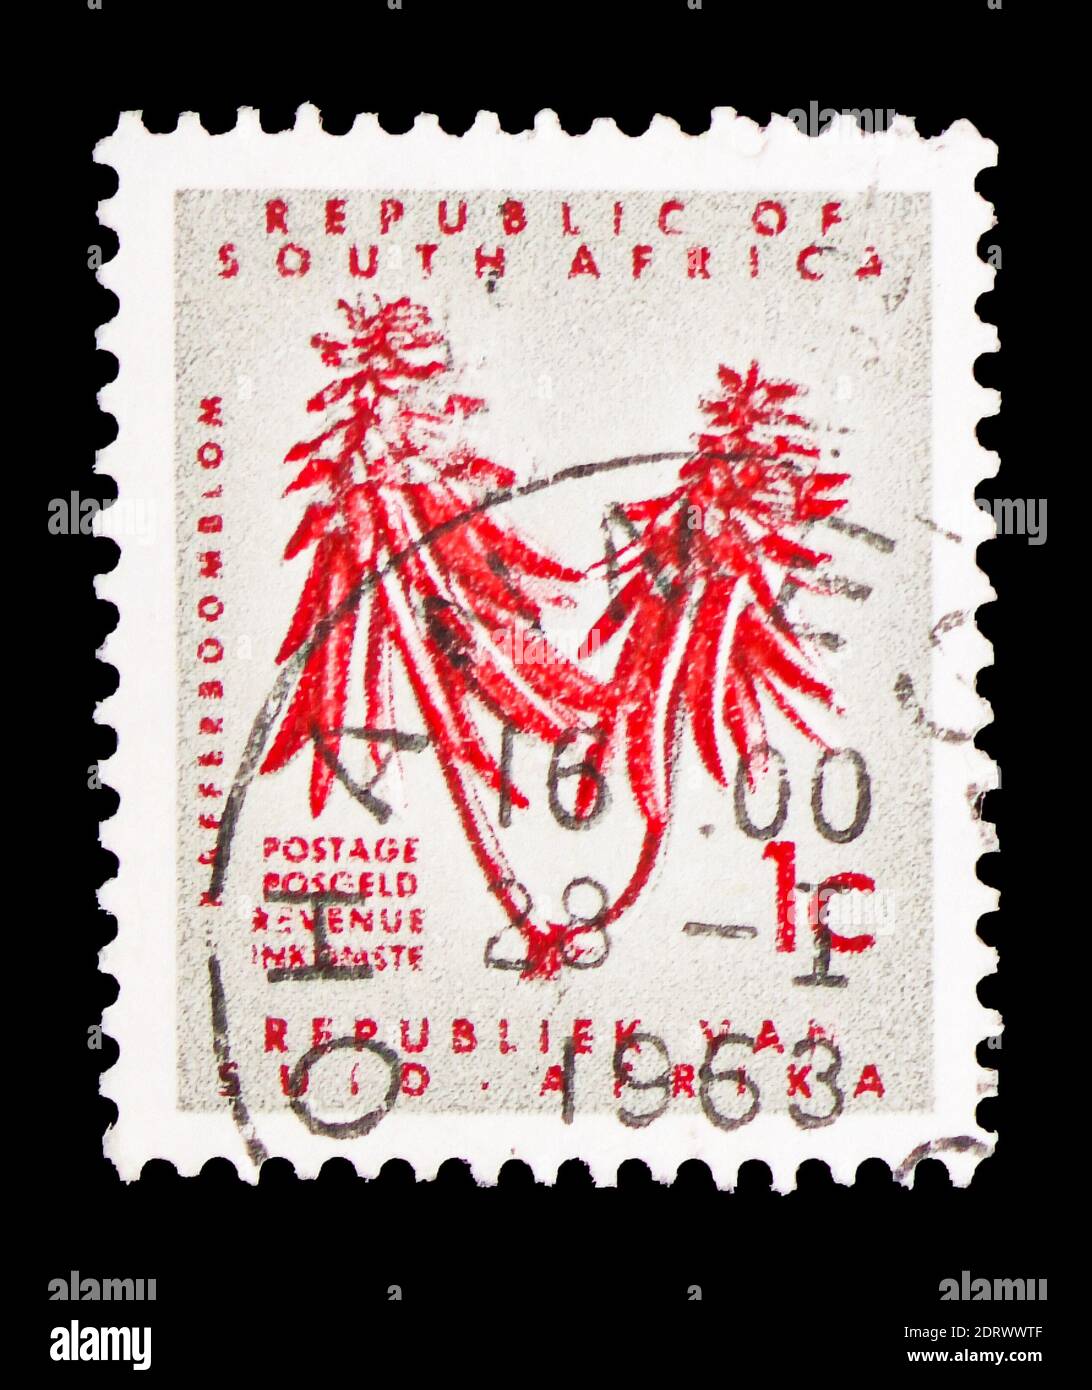 MOSCOW, RUSSIA - FEBRUARY 10, 2019: A stamp printed in South Africa shows Erythrina, Definitive Issue - Decimal Issueserie, circa 1968 Stock Photo